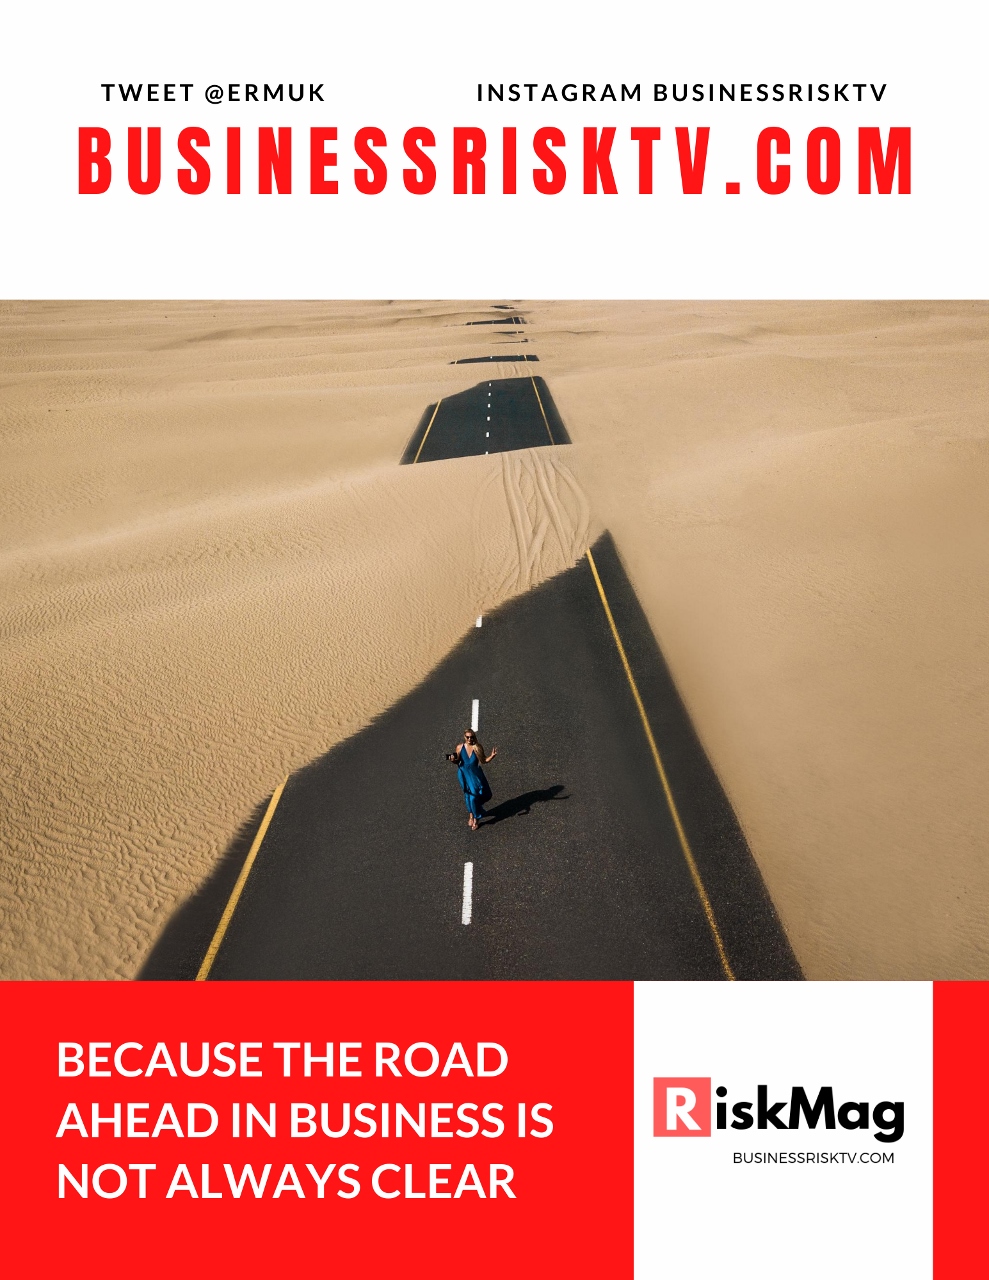 Risk Based Approach To Business Success